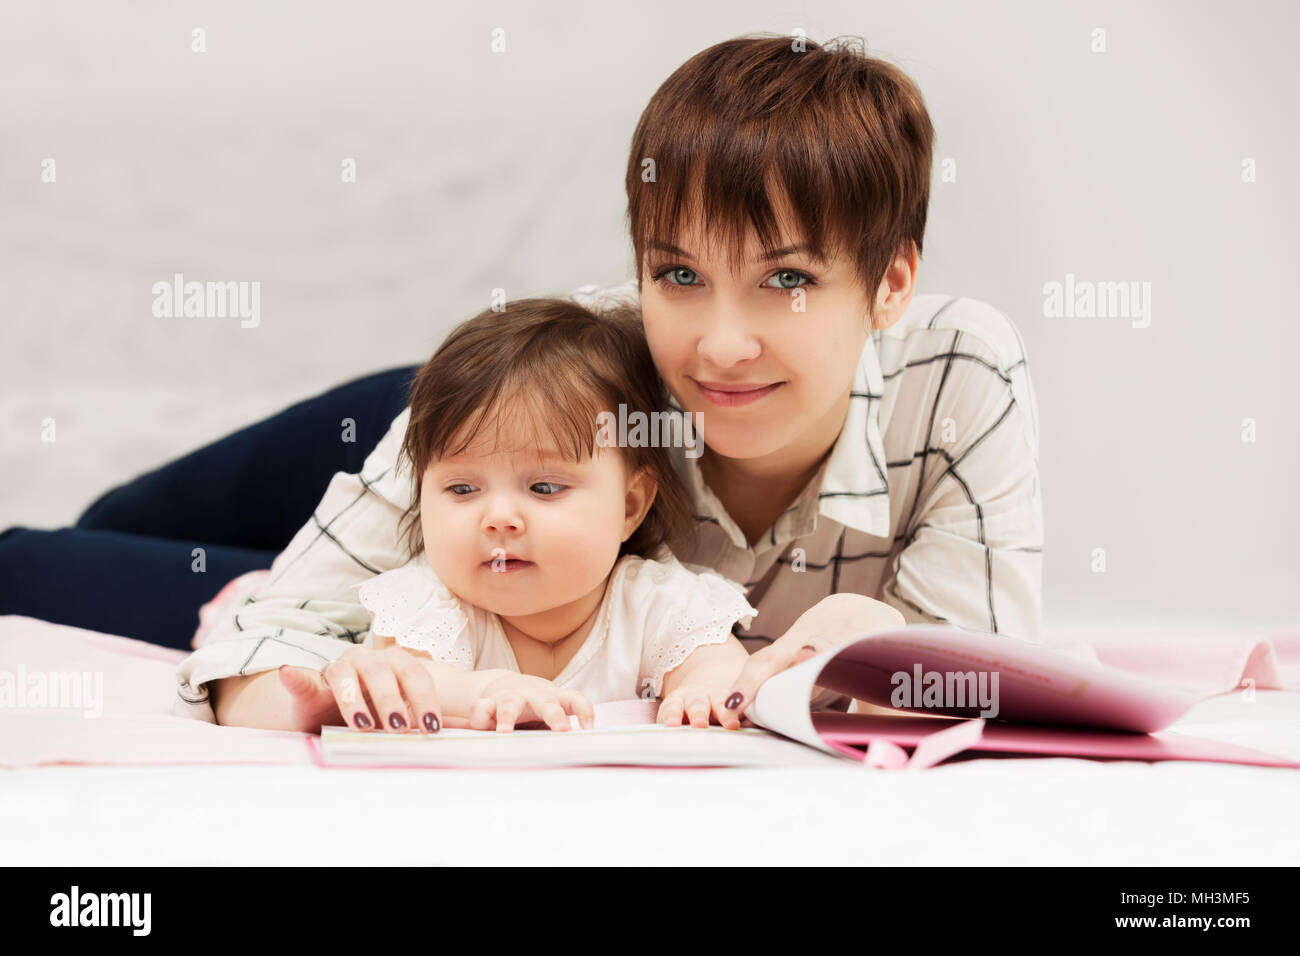 Mother and little baby girl reading a book on bed Stock Photo